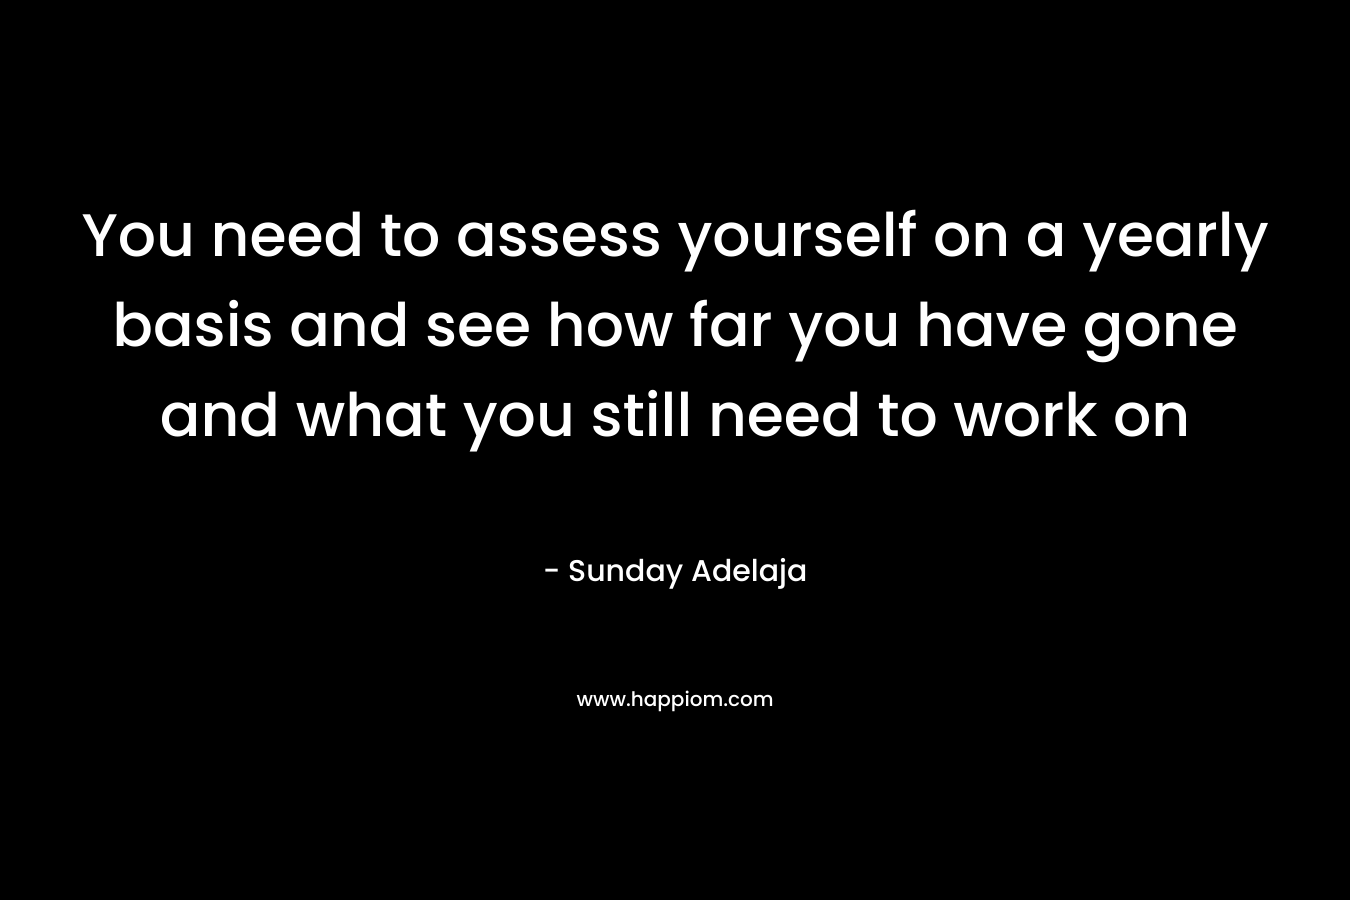 You need to assess yourself on a yearly basis and see how far you have gone and what you still need to work on